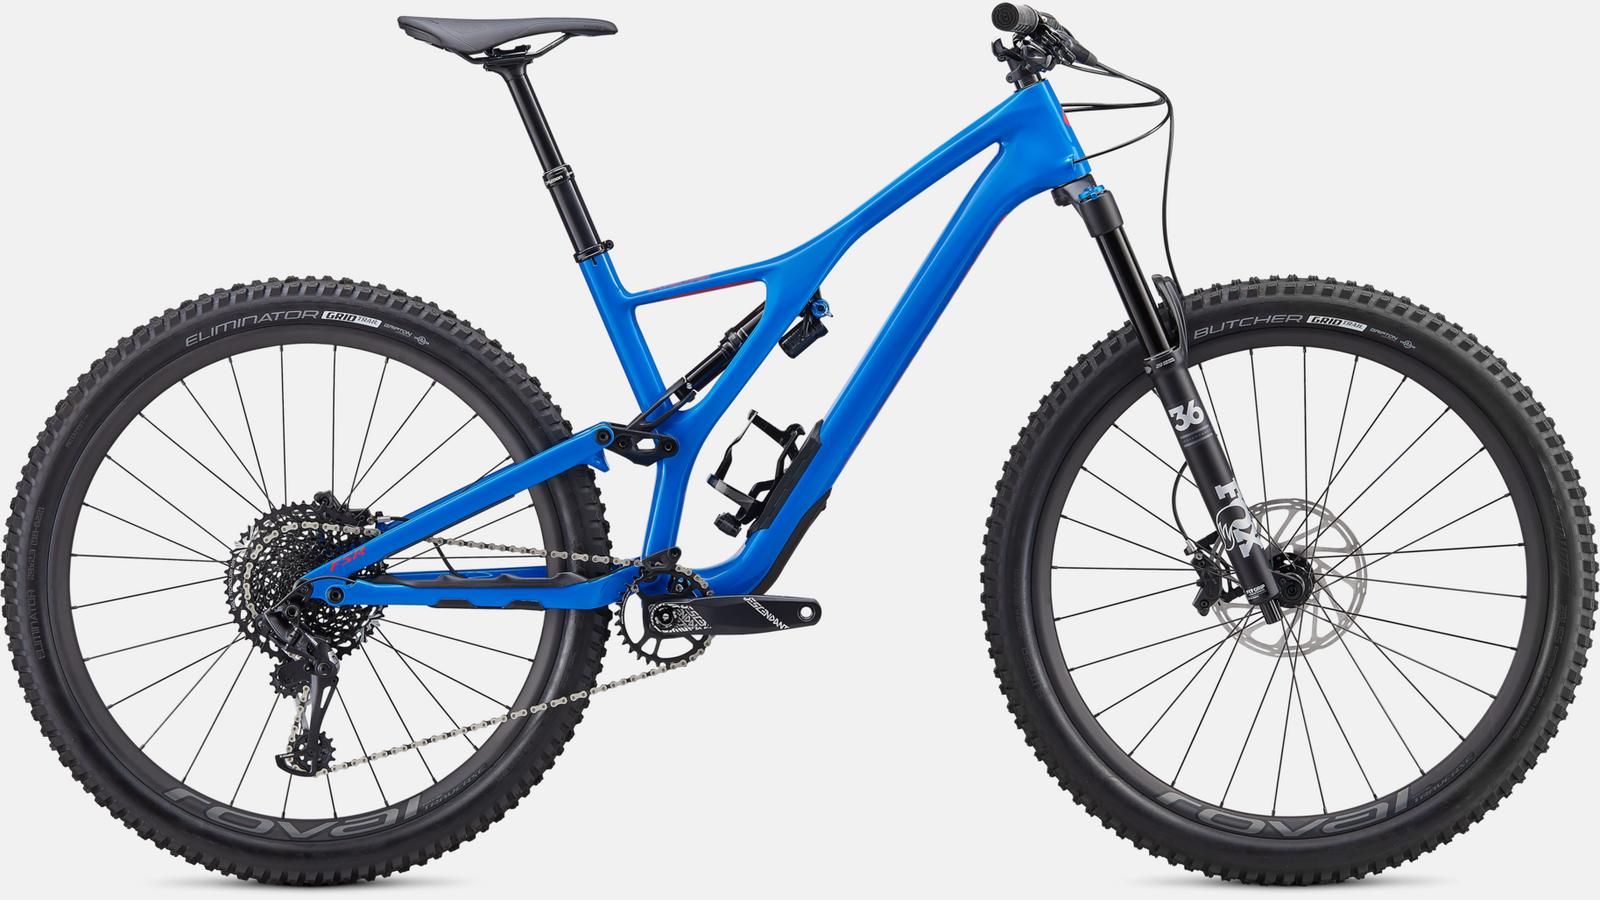 Paint for 2020 Specialized Stumpjumper Expert Carbon 29 - Gloss Pro Blue